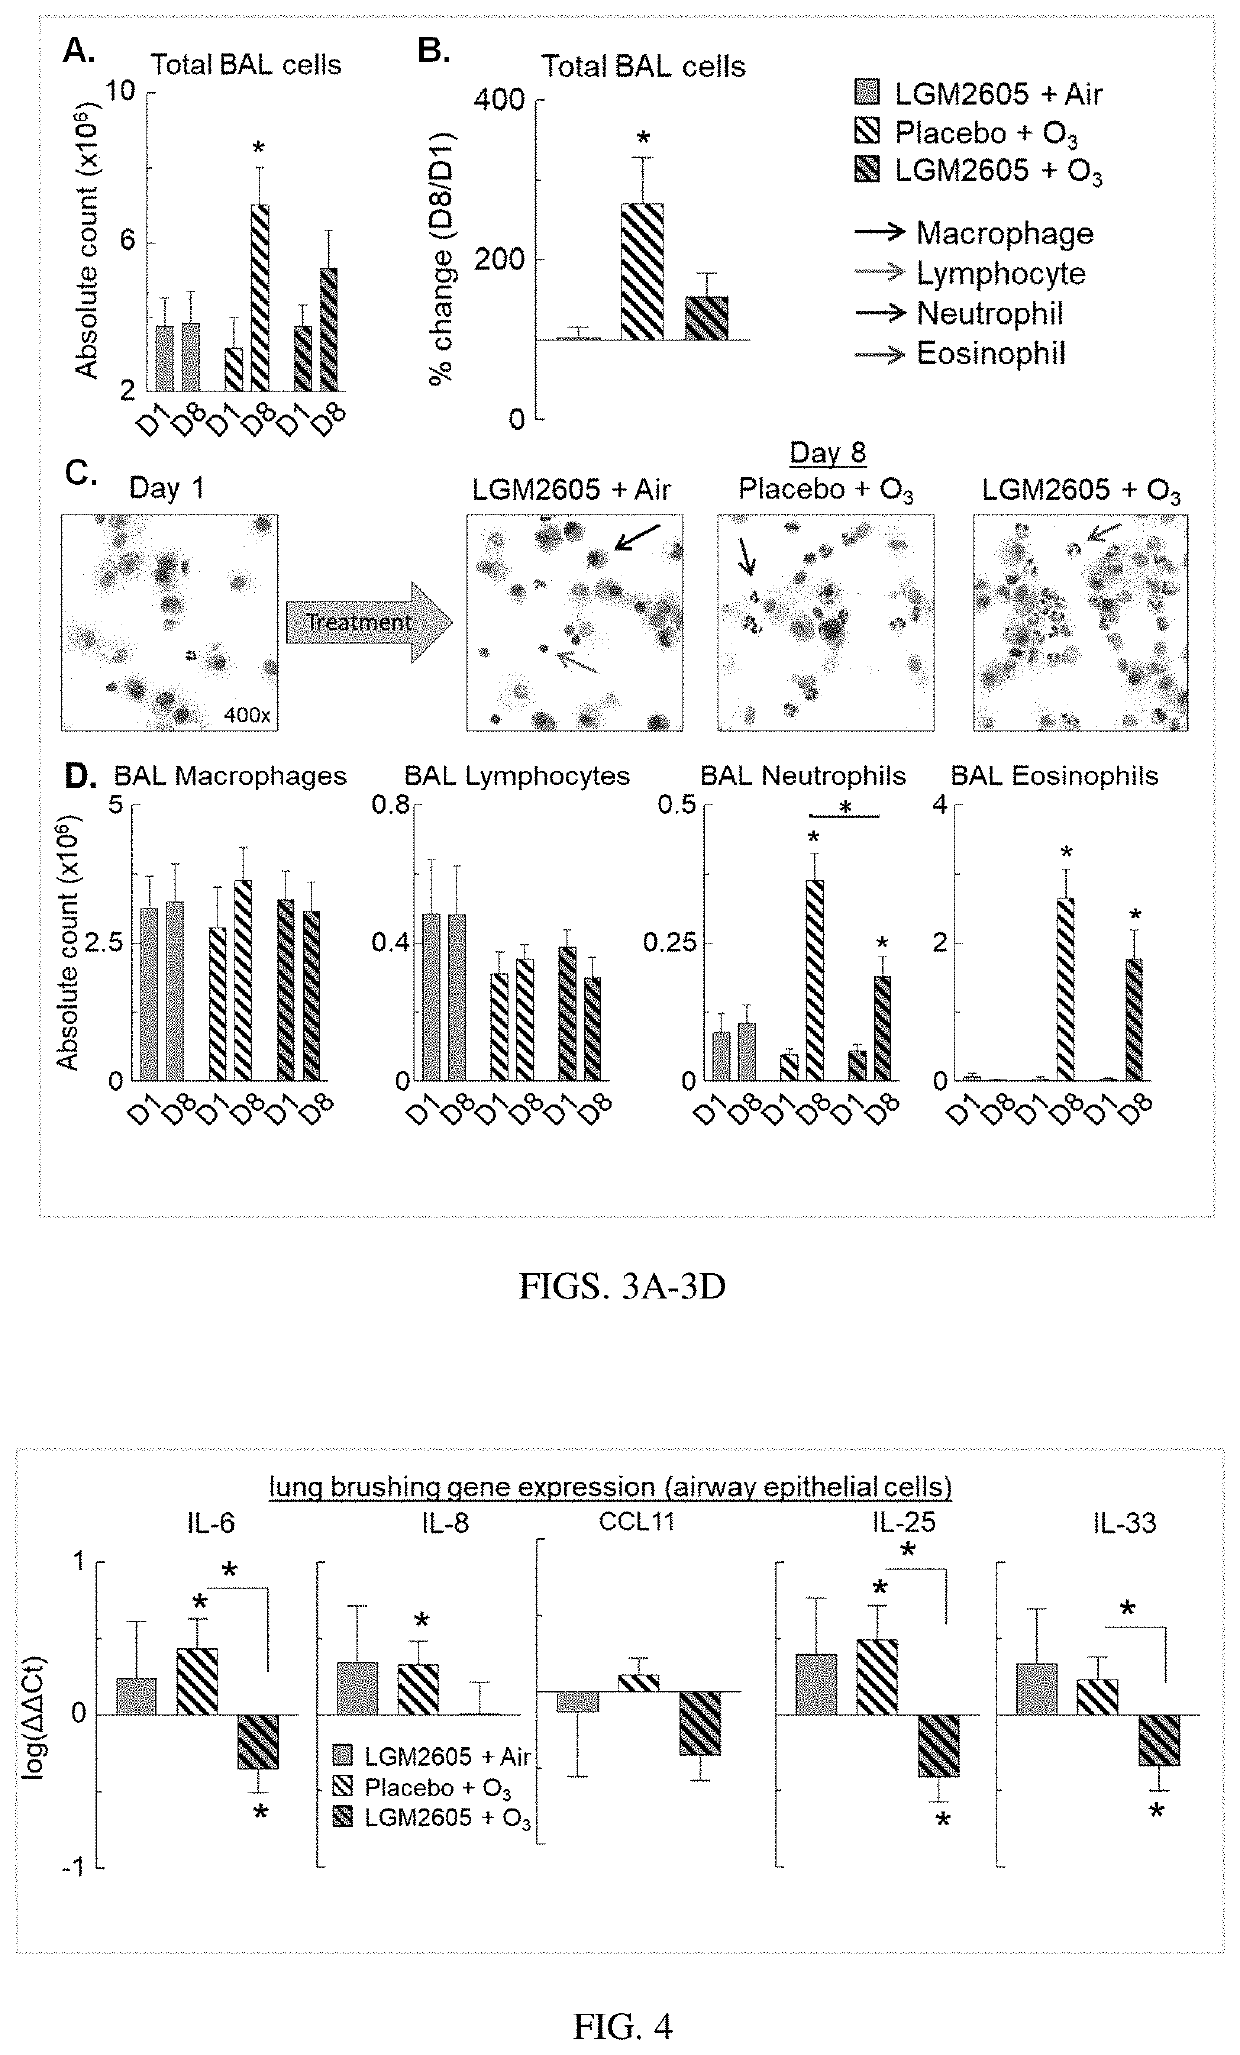 Effects of LGM2605 on a primate model of asthma